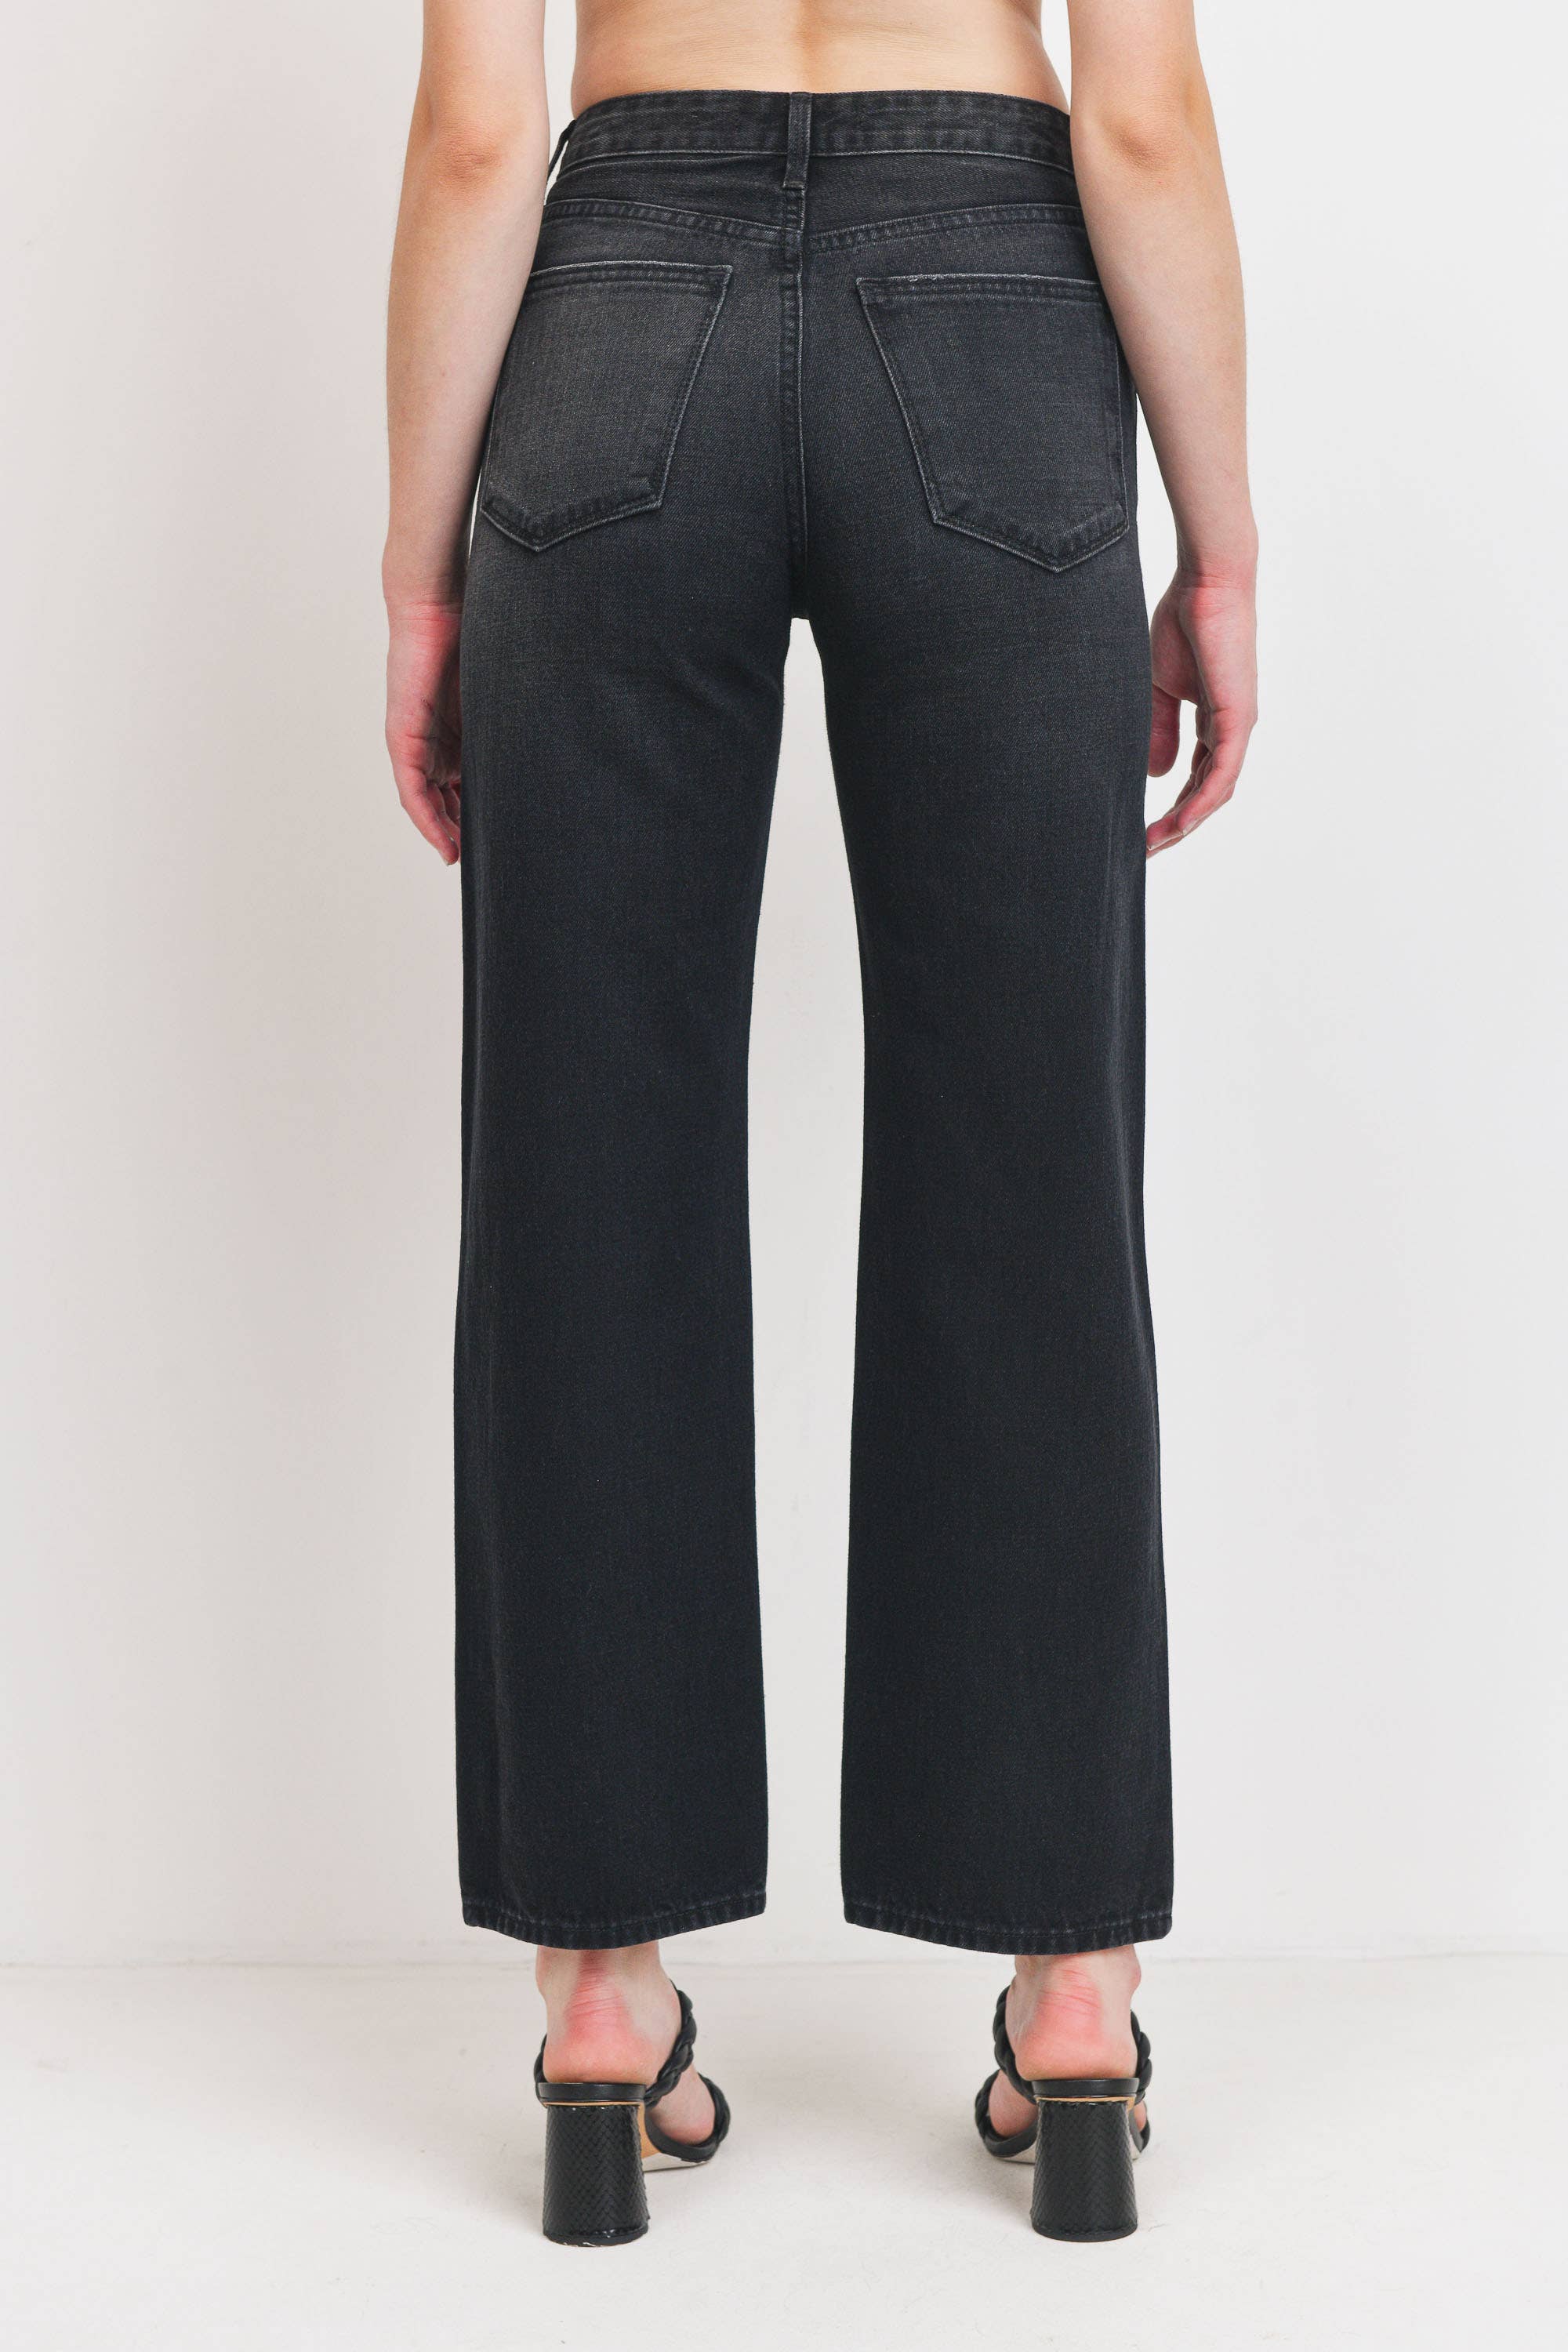 The Classic Dad Jeans by Just Black Denim